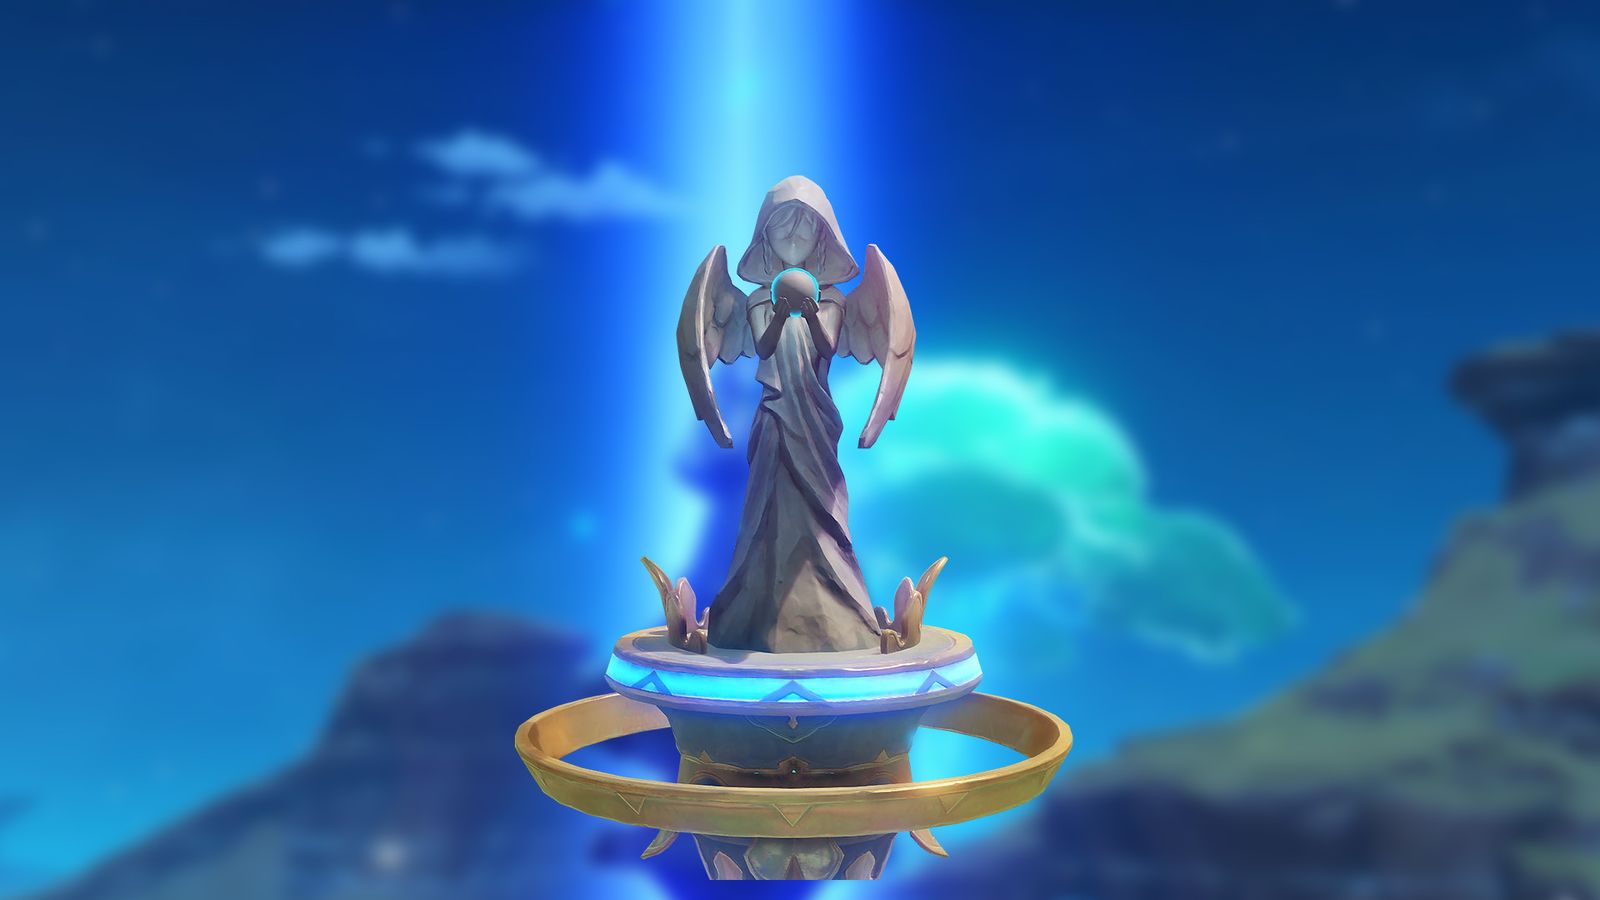 An image of a Statue of Seven in Genshin Impact.